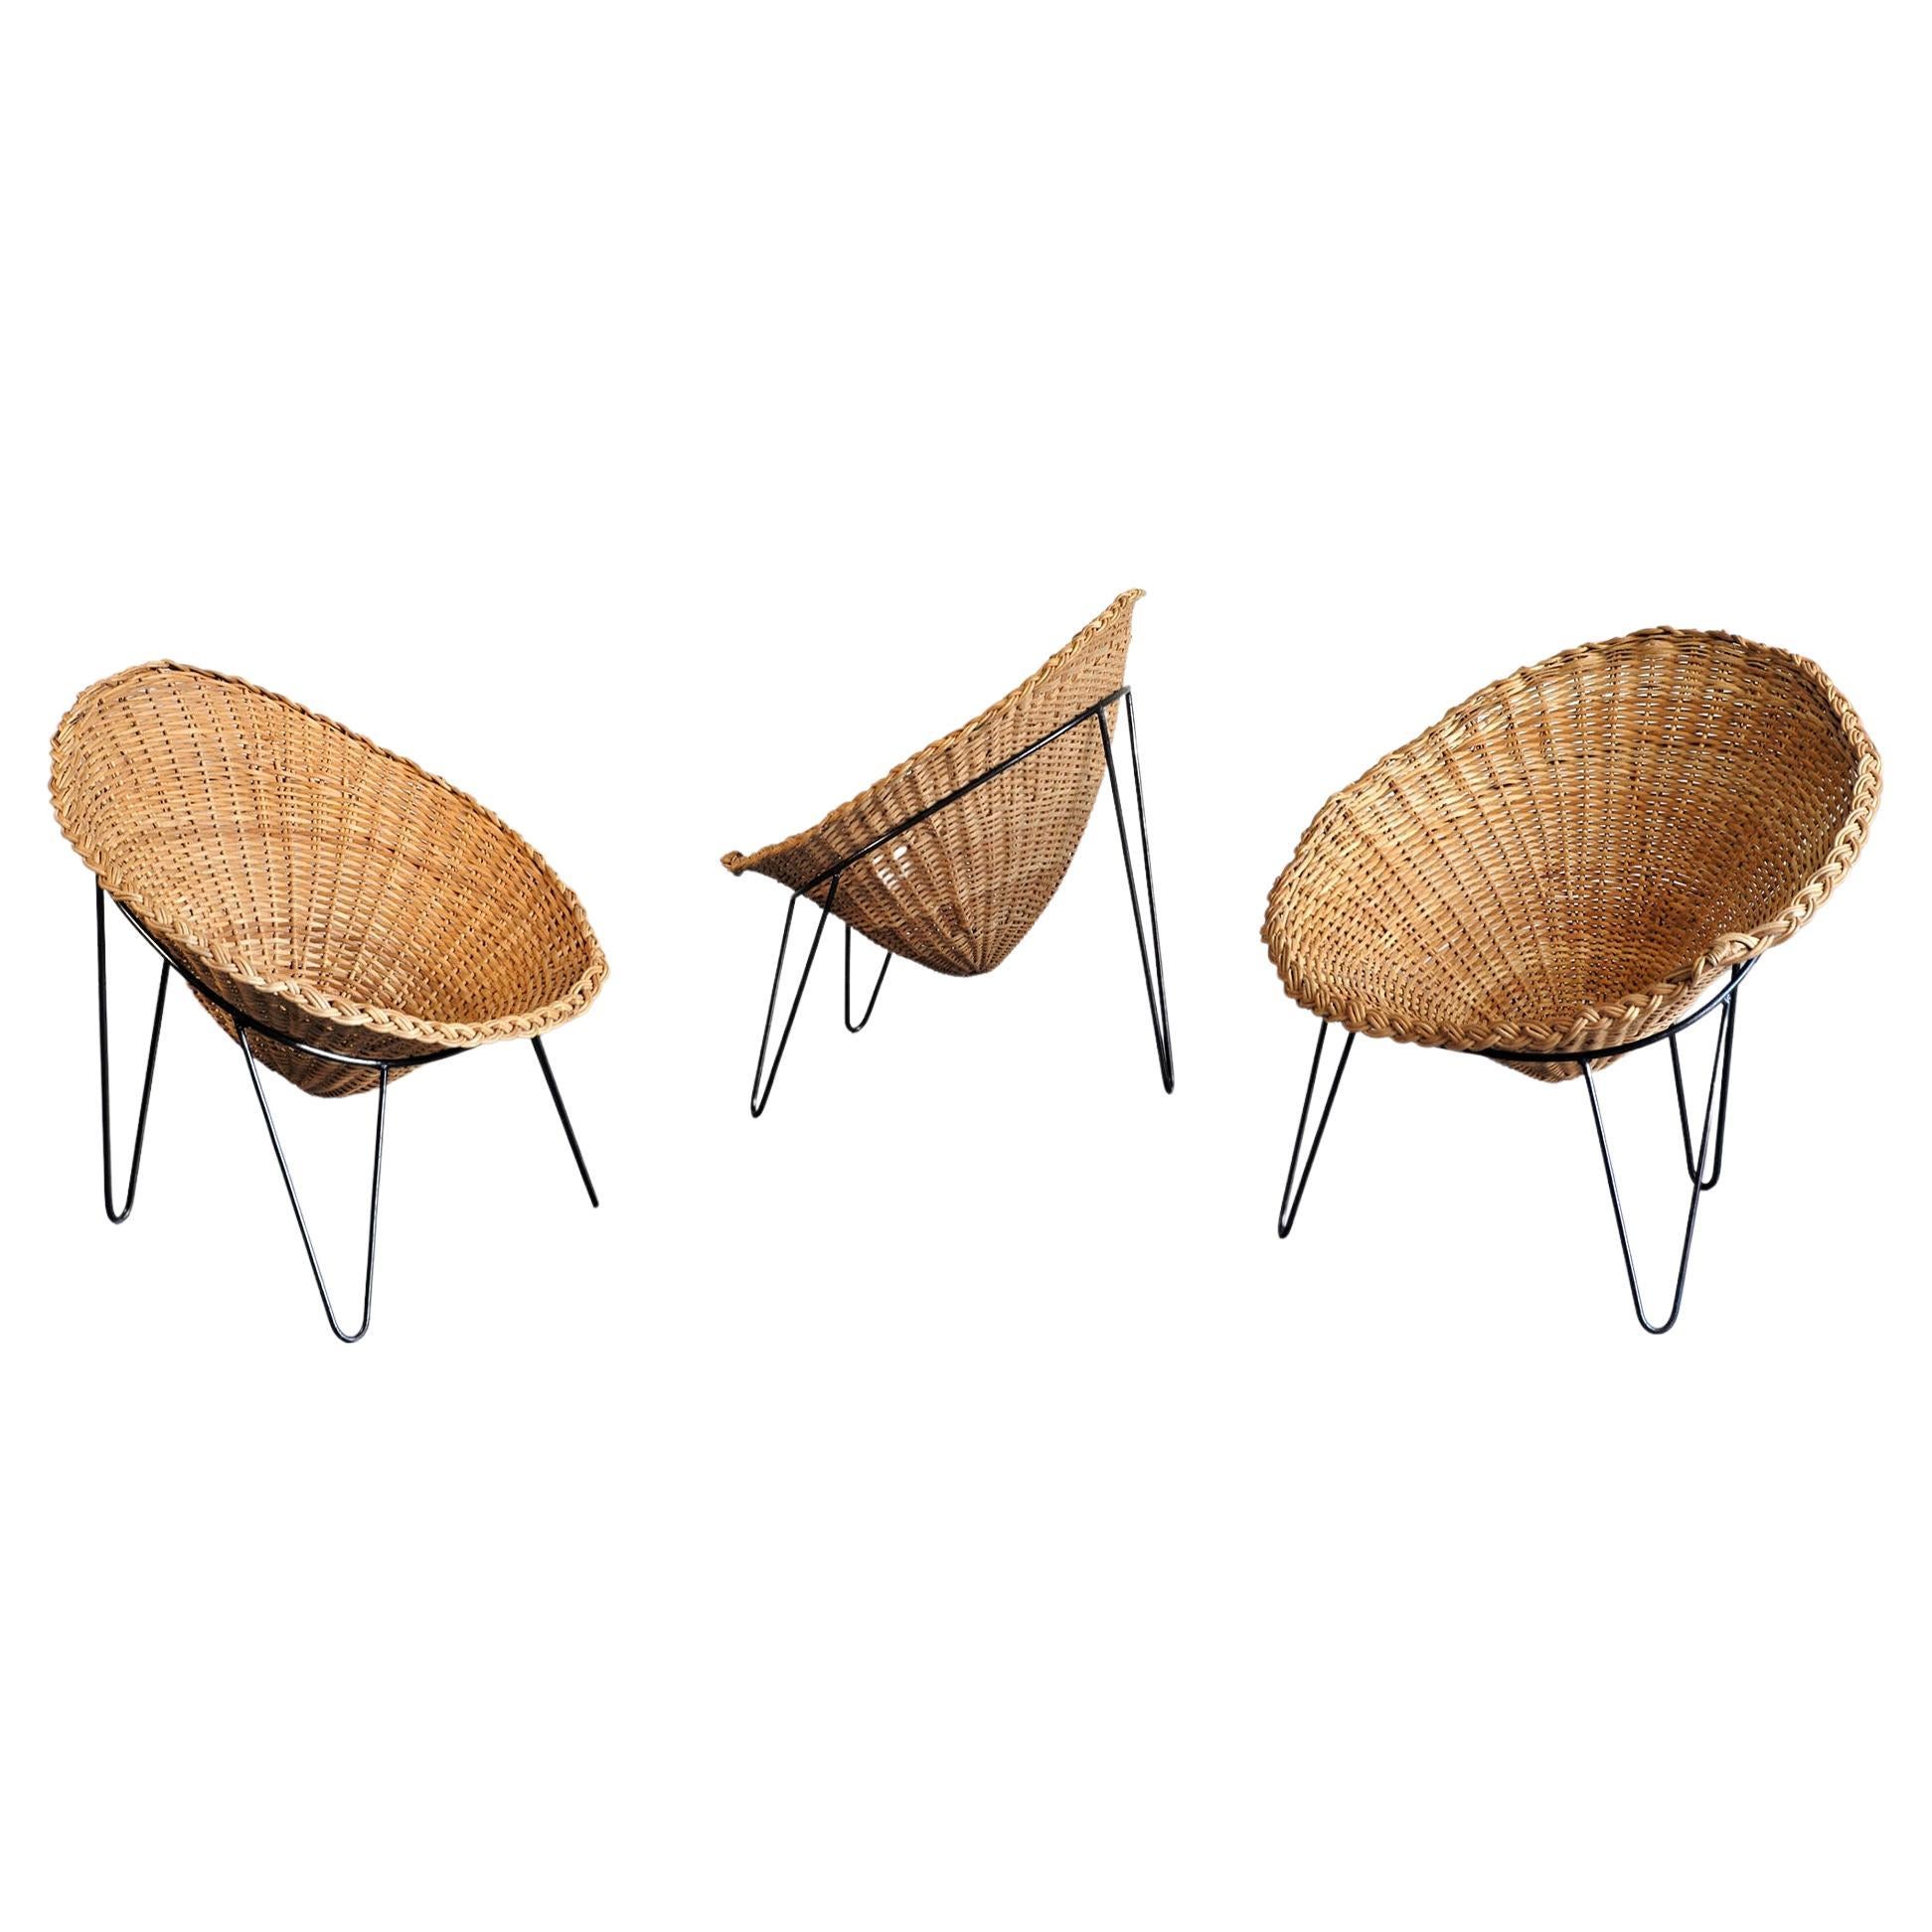 Set of 3 Rattan Armchairs, Italy, 1950 For Sale